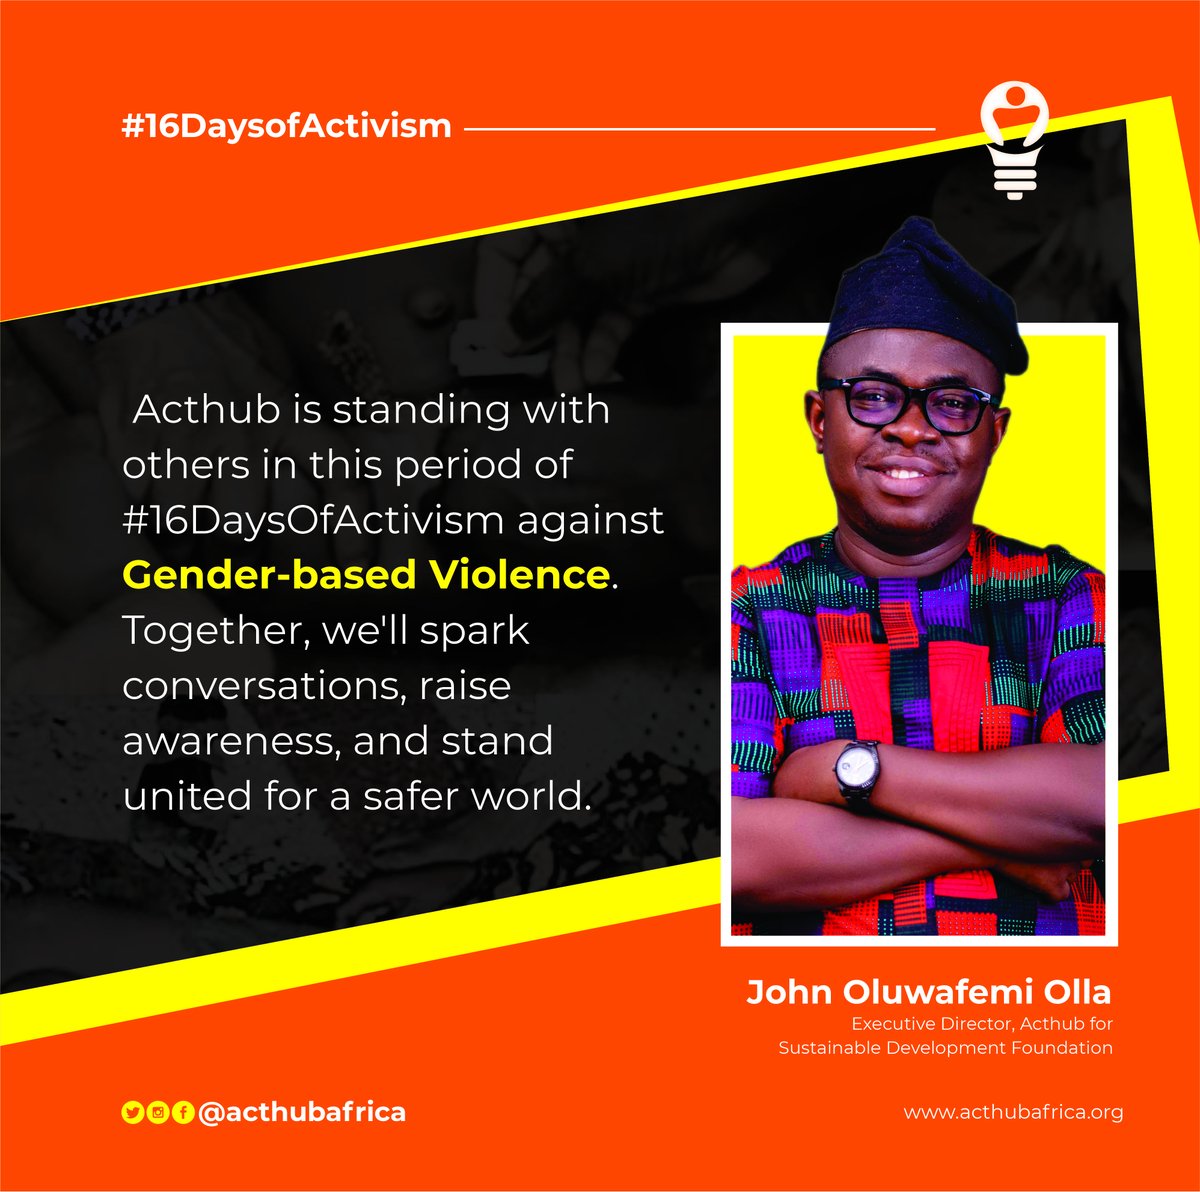 Acthub is standing with others in this period of #16DaysOfActivism against Gender-based Violence. Together, we'll spark conversations, raise awareness, and stand united for a safer world. @AyodejiUzoma @UNFPANigeria @twergywhite